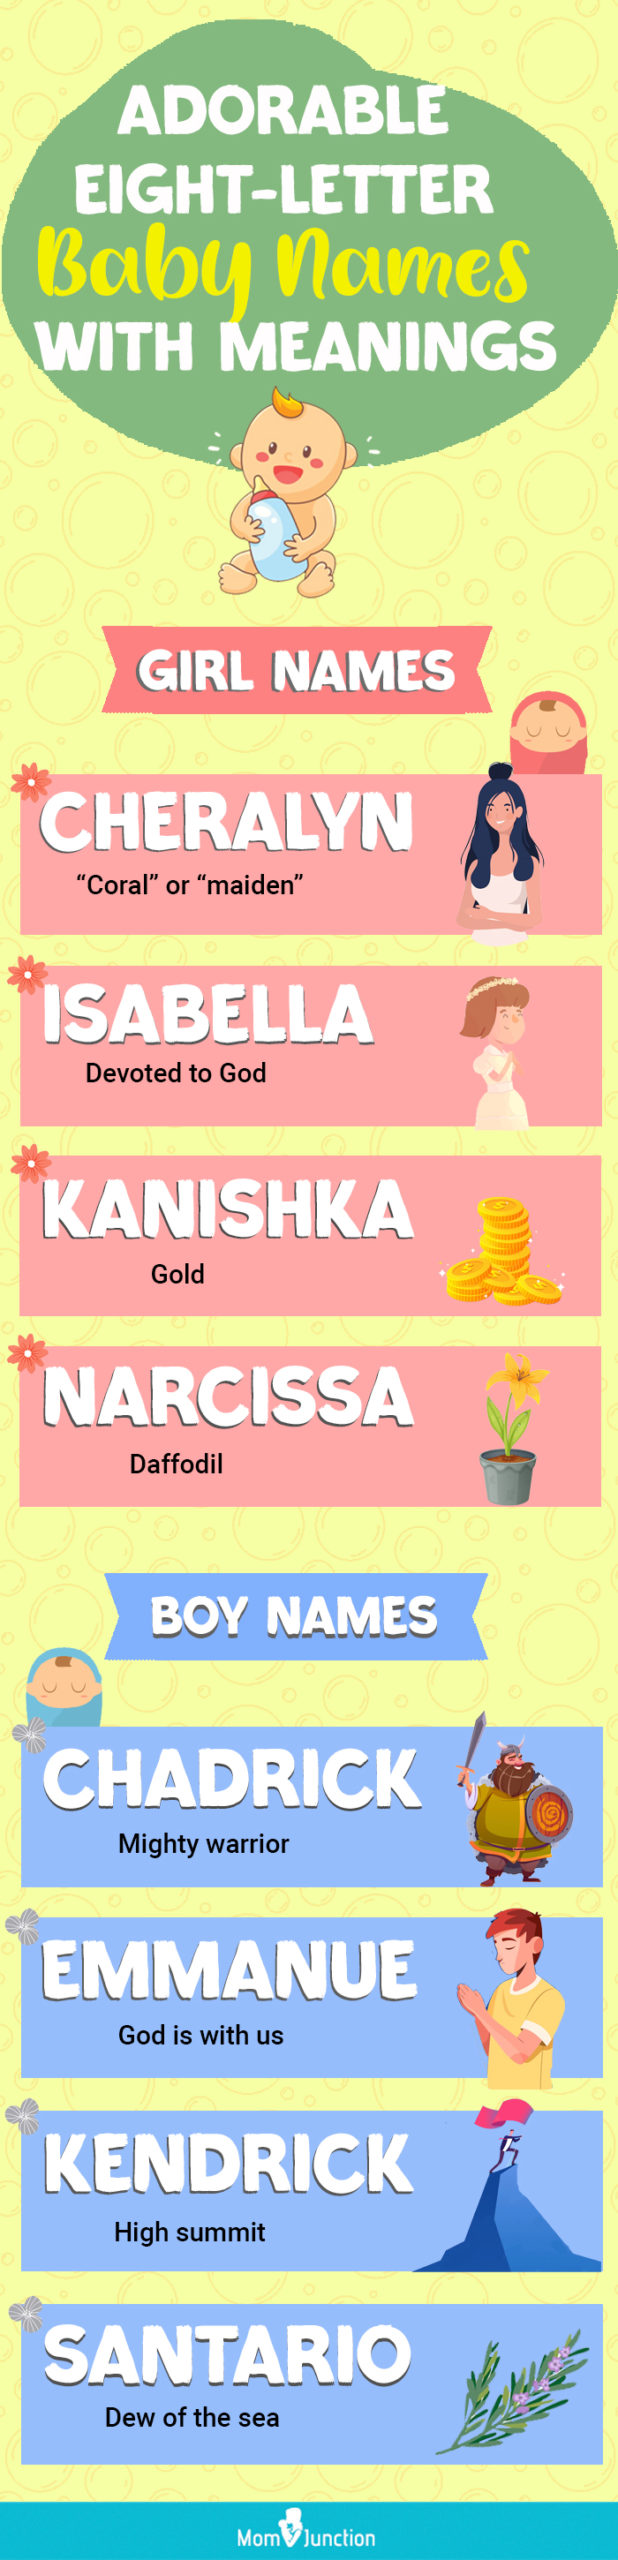 adorable eight letter baby names with meanings (infographic)